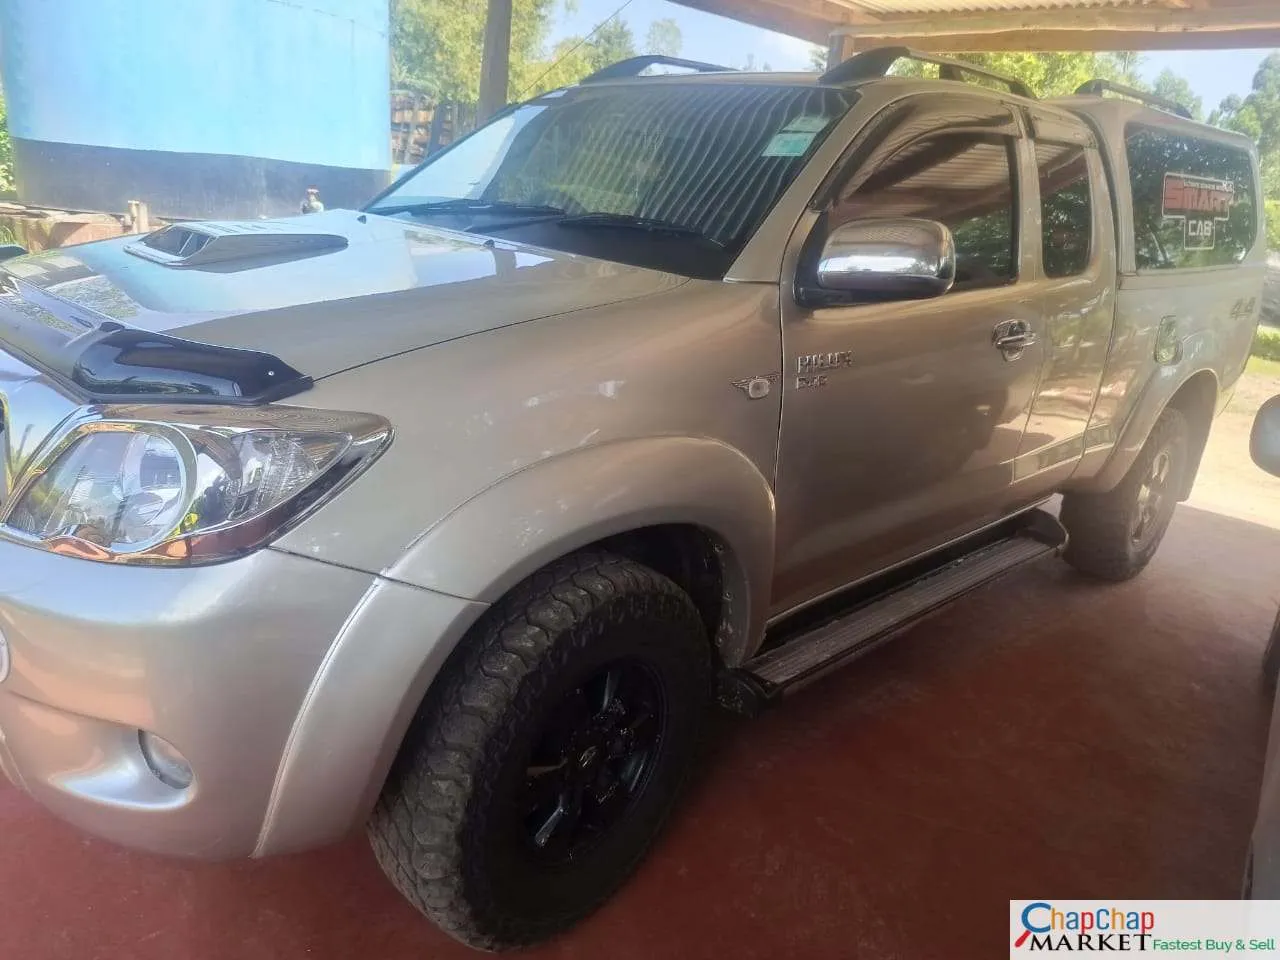 Cars Cars For Sale-Toyota Hilux Double cab You Pay 30% Deposit trade in OK hire purchase installments cabin 4